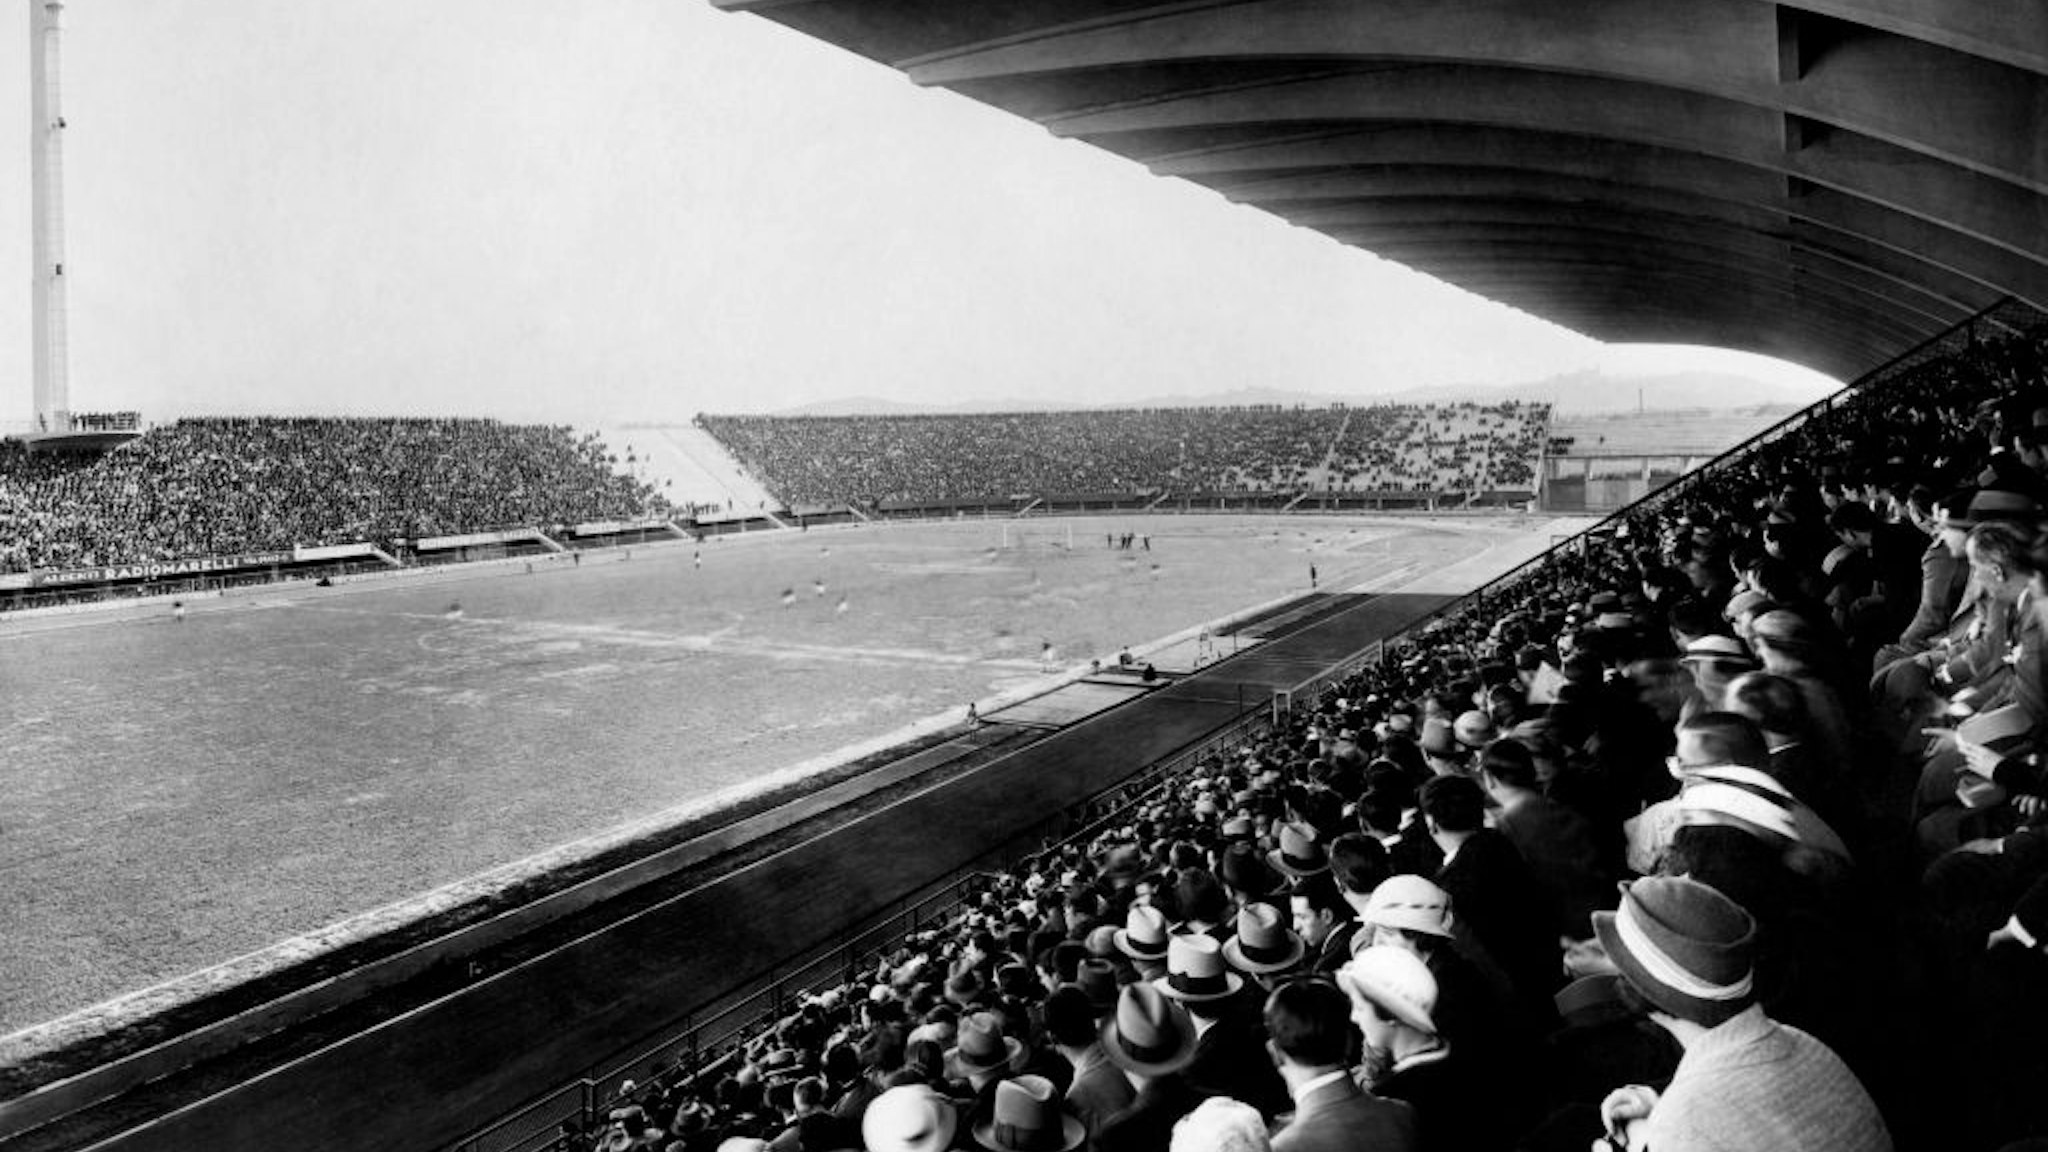 Giovanni berta stadium, florence 30s. (Photo by: Touring Club Italiano/Marka/Universal Images Group via Getty Images)